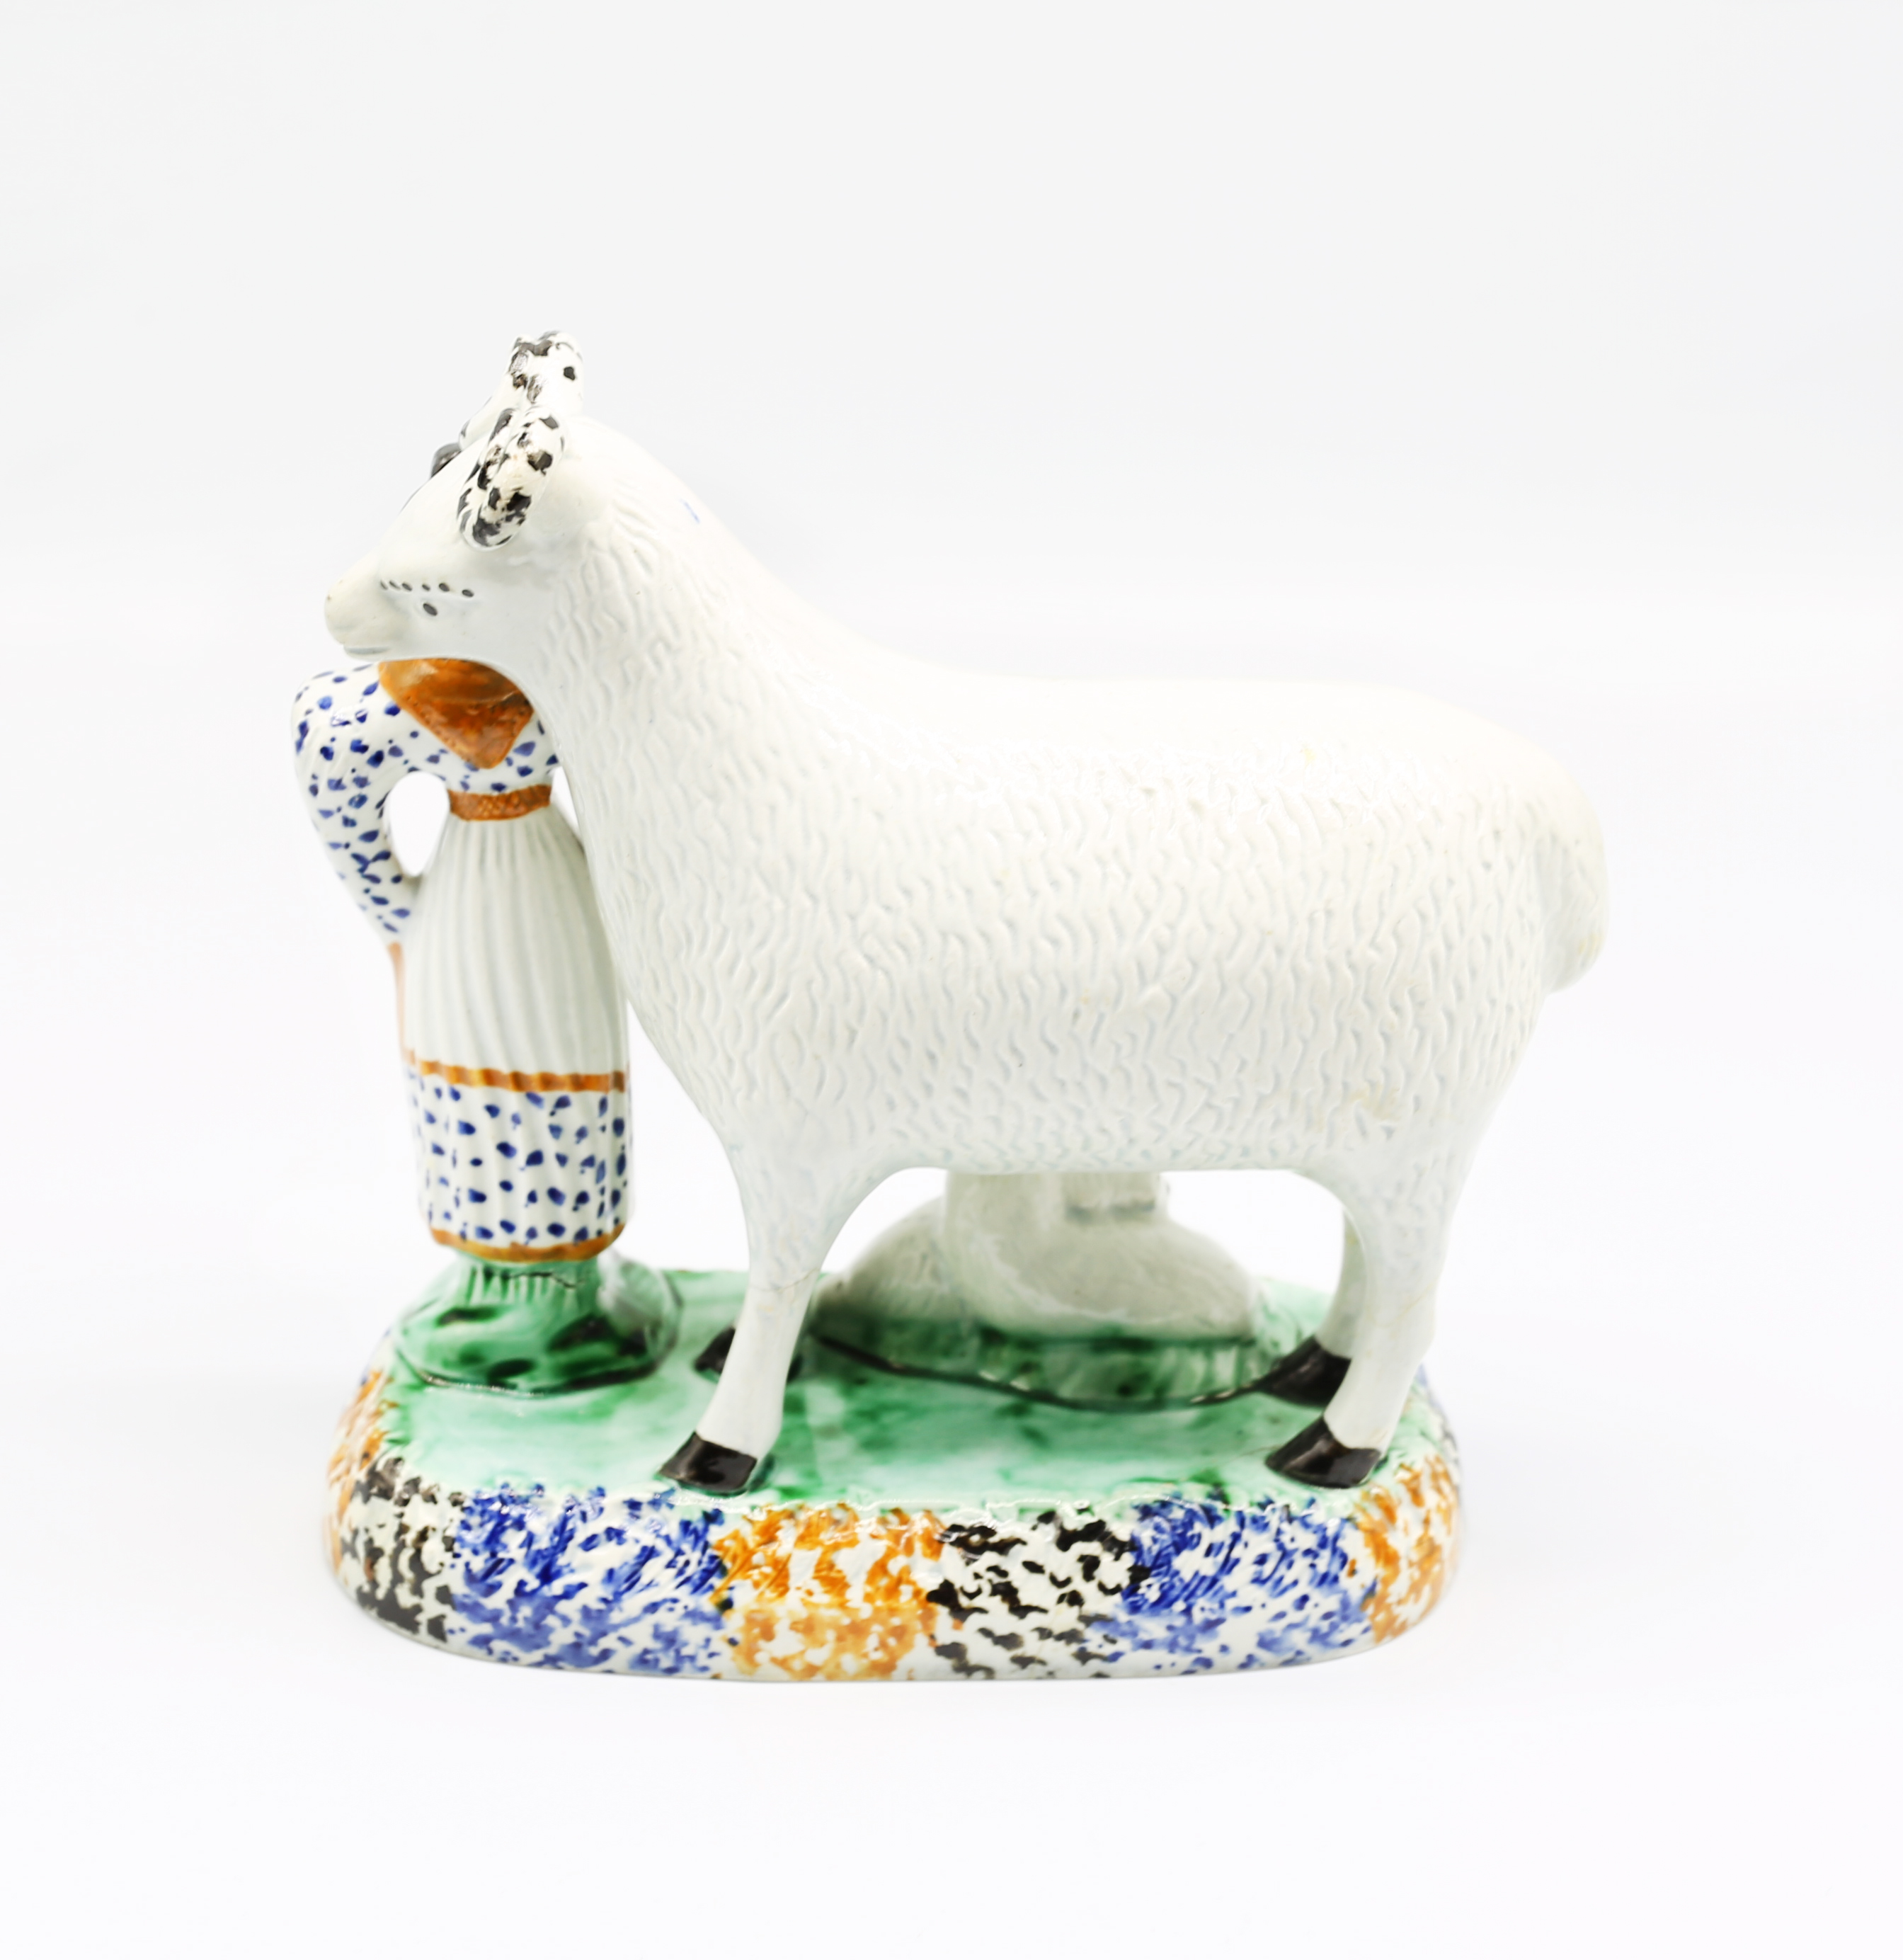 A Prattware model of a sheep and her lambs laying beneath her, with a shepherdess standing to the - Image 3 of 15